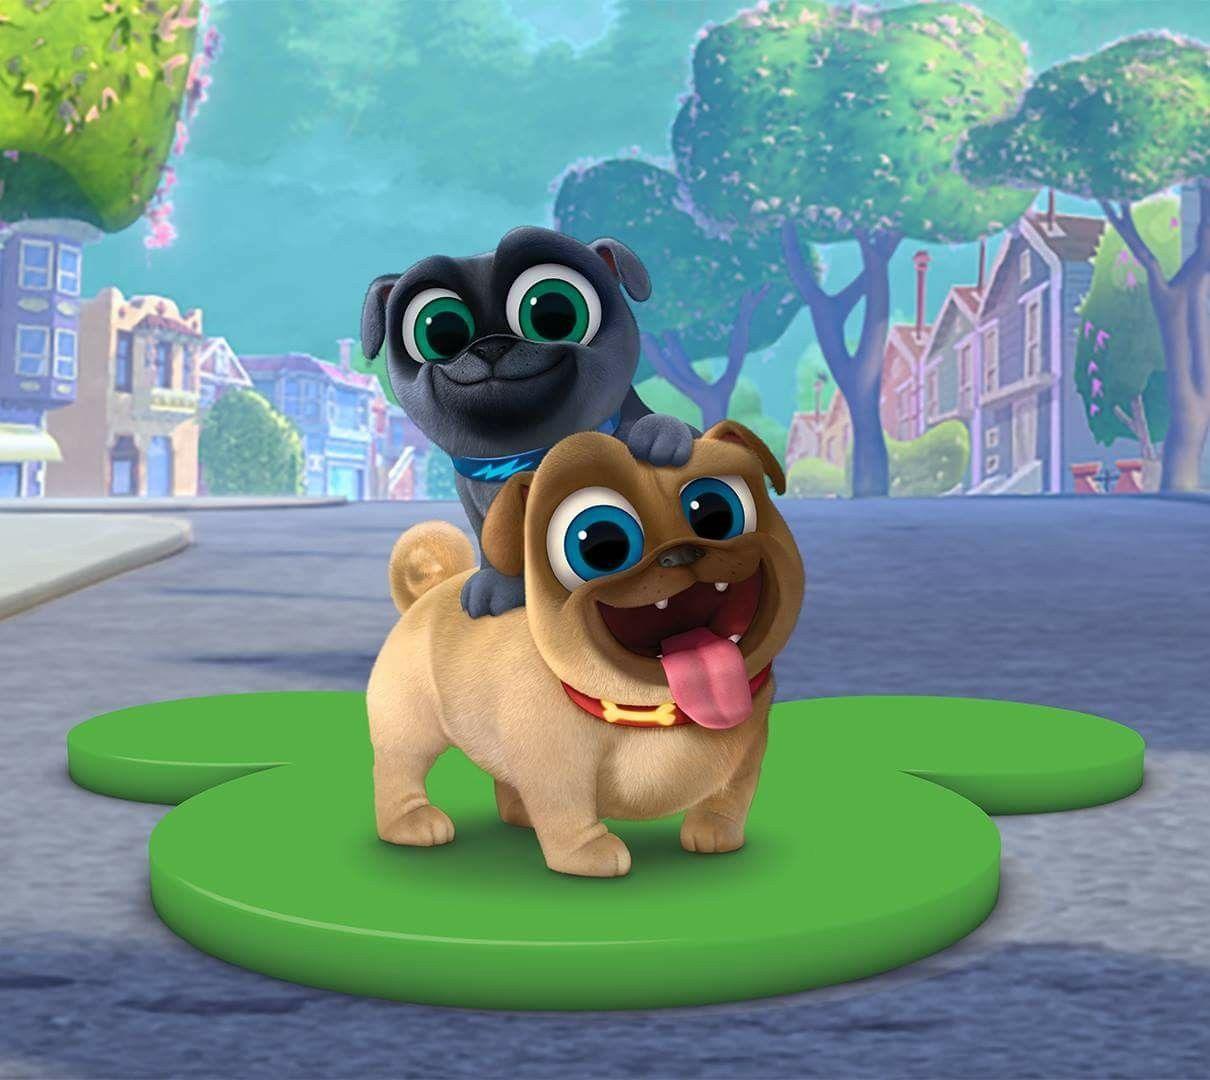 Puppy Dog Pals Wallpapers - Top Free Puppy Dog Pals Backgrounds - WallpaperAccess